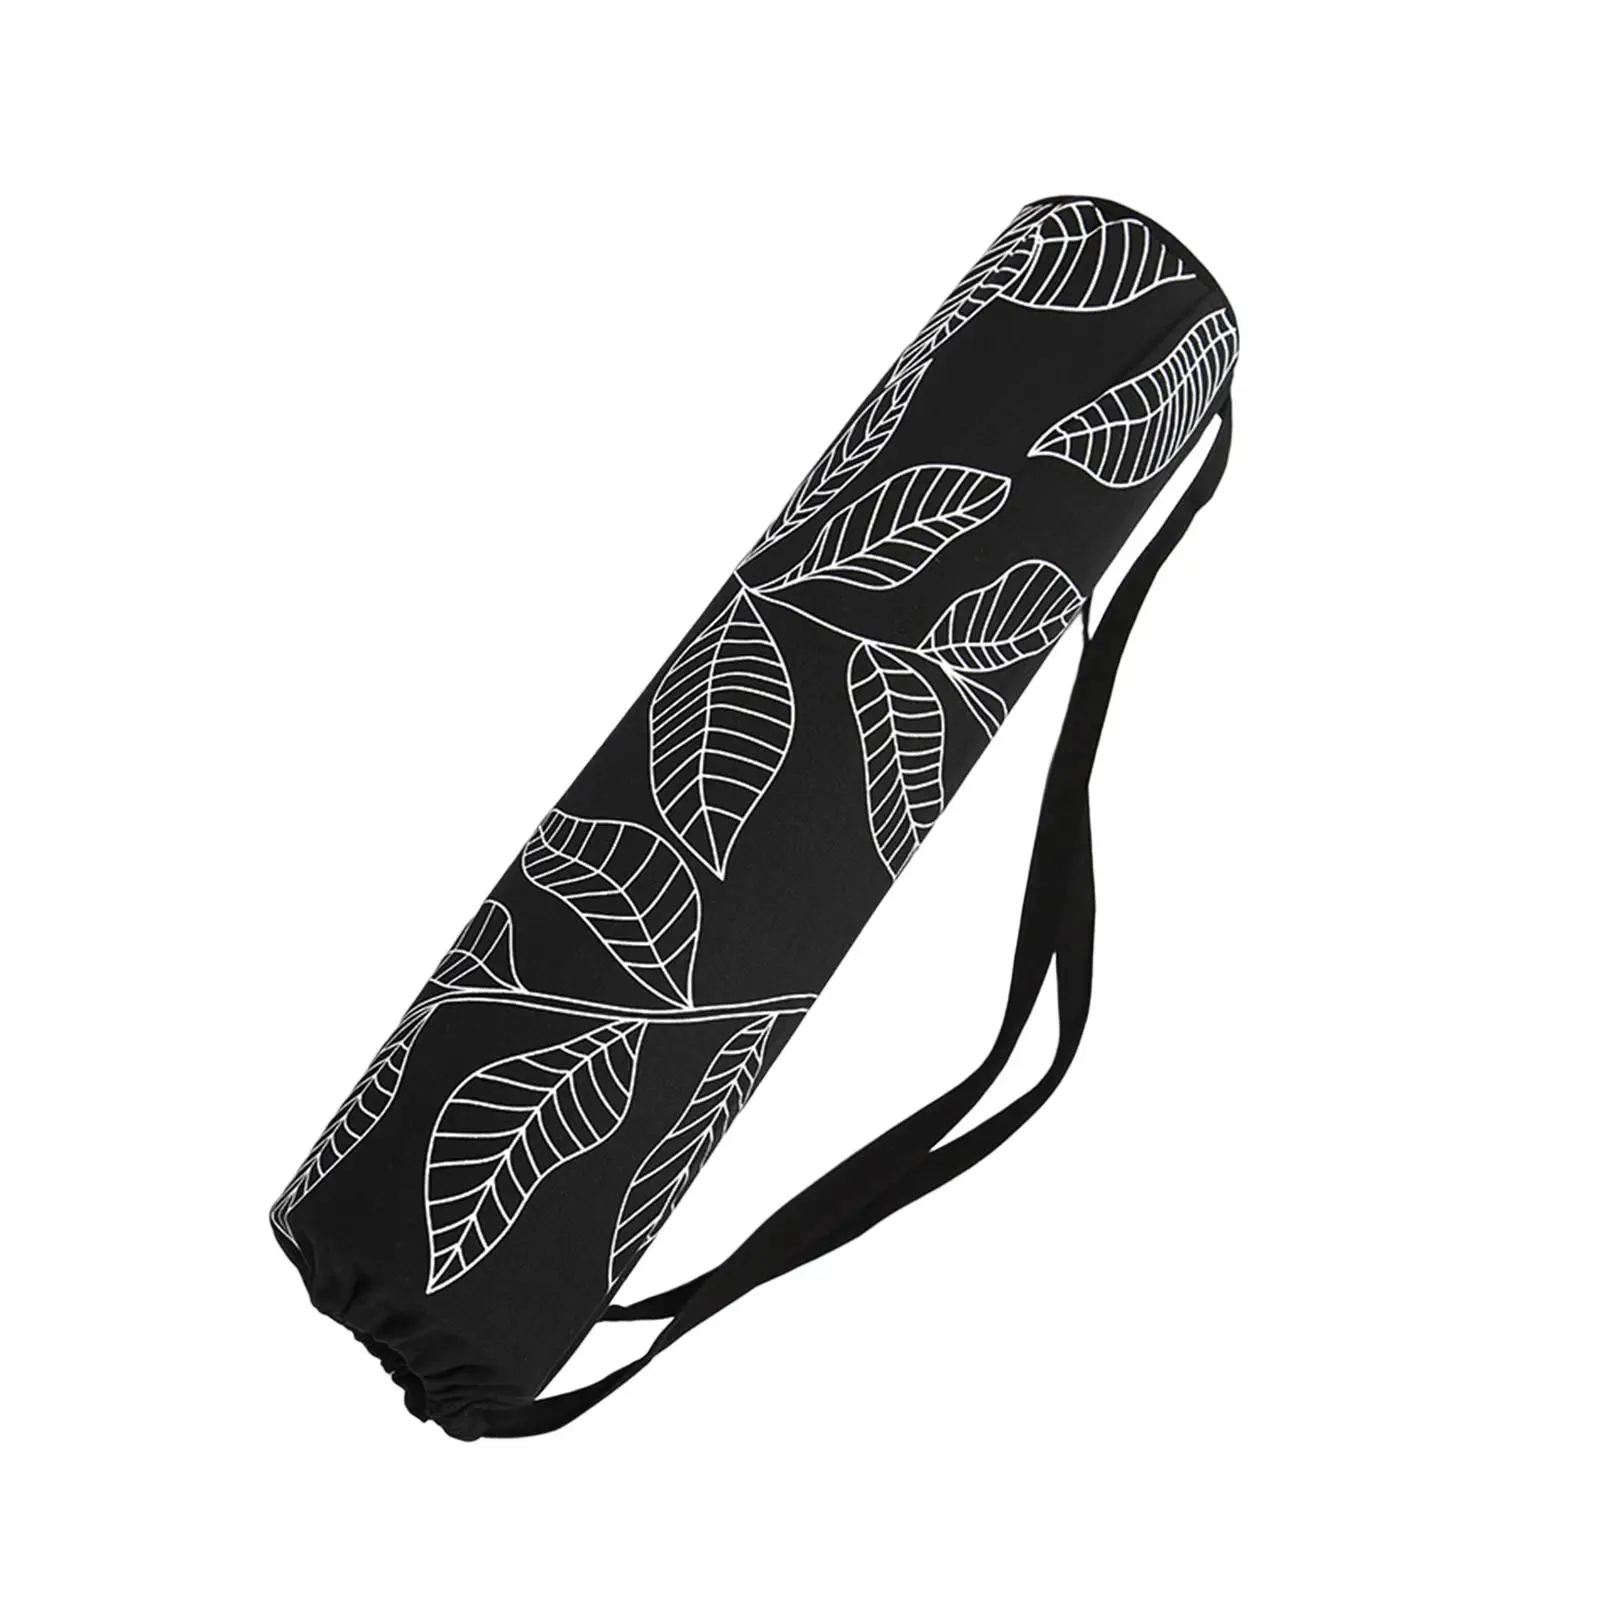 Travel Yoga Mat Carrier Bag Durable Lightweight Size 29x5.5inch Wear Resistant Storage Bag with Strap Multifunctional